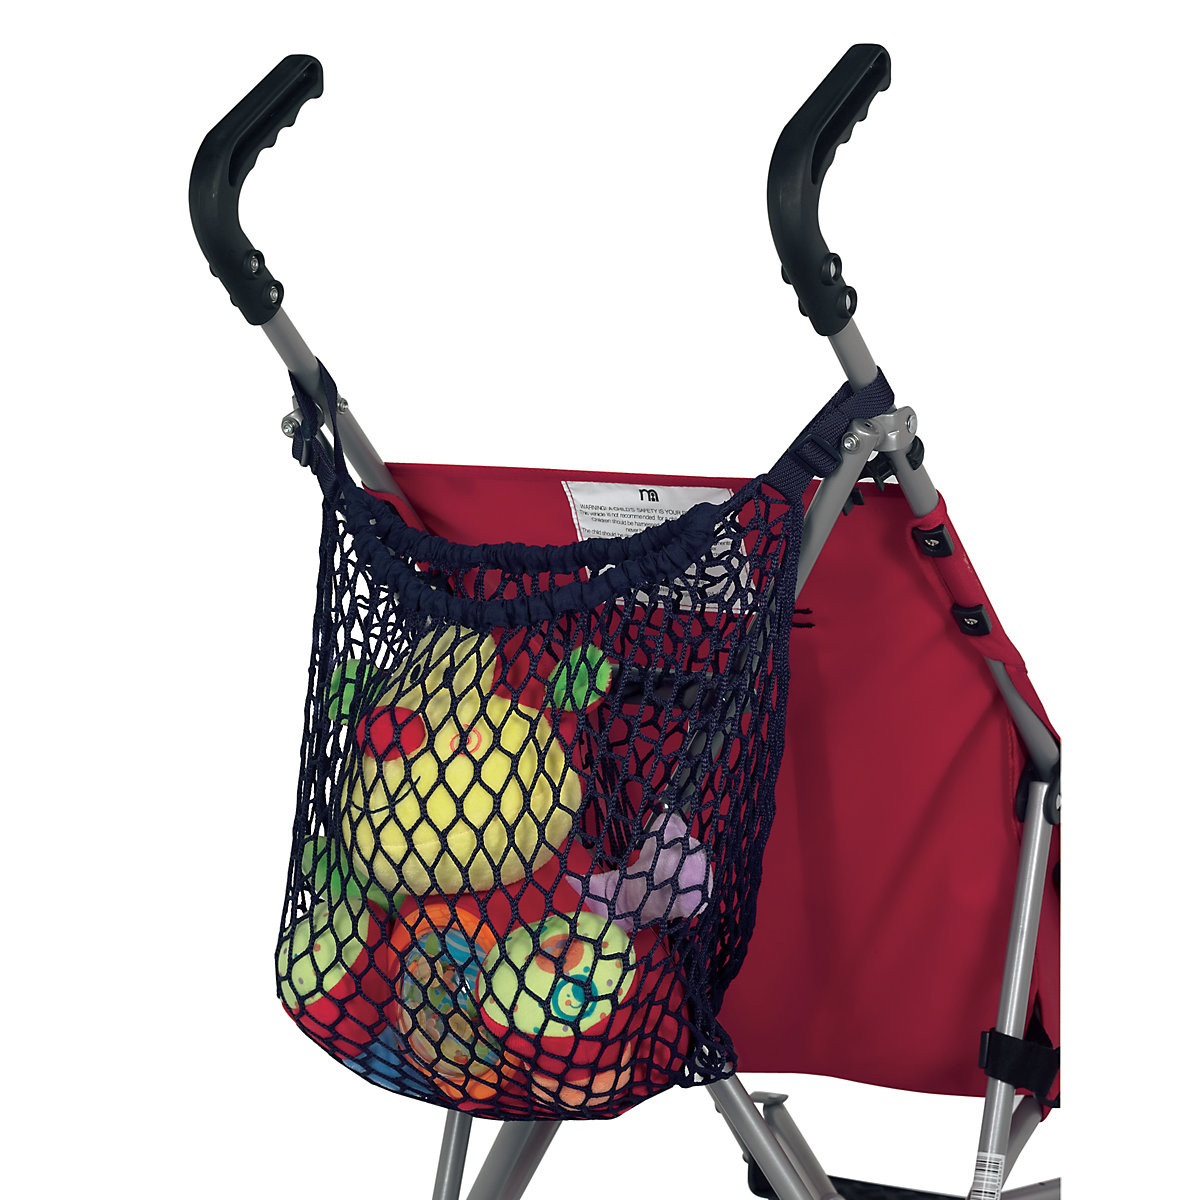 baby jogger outlet